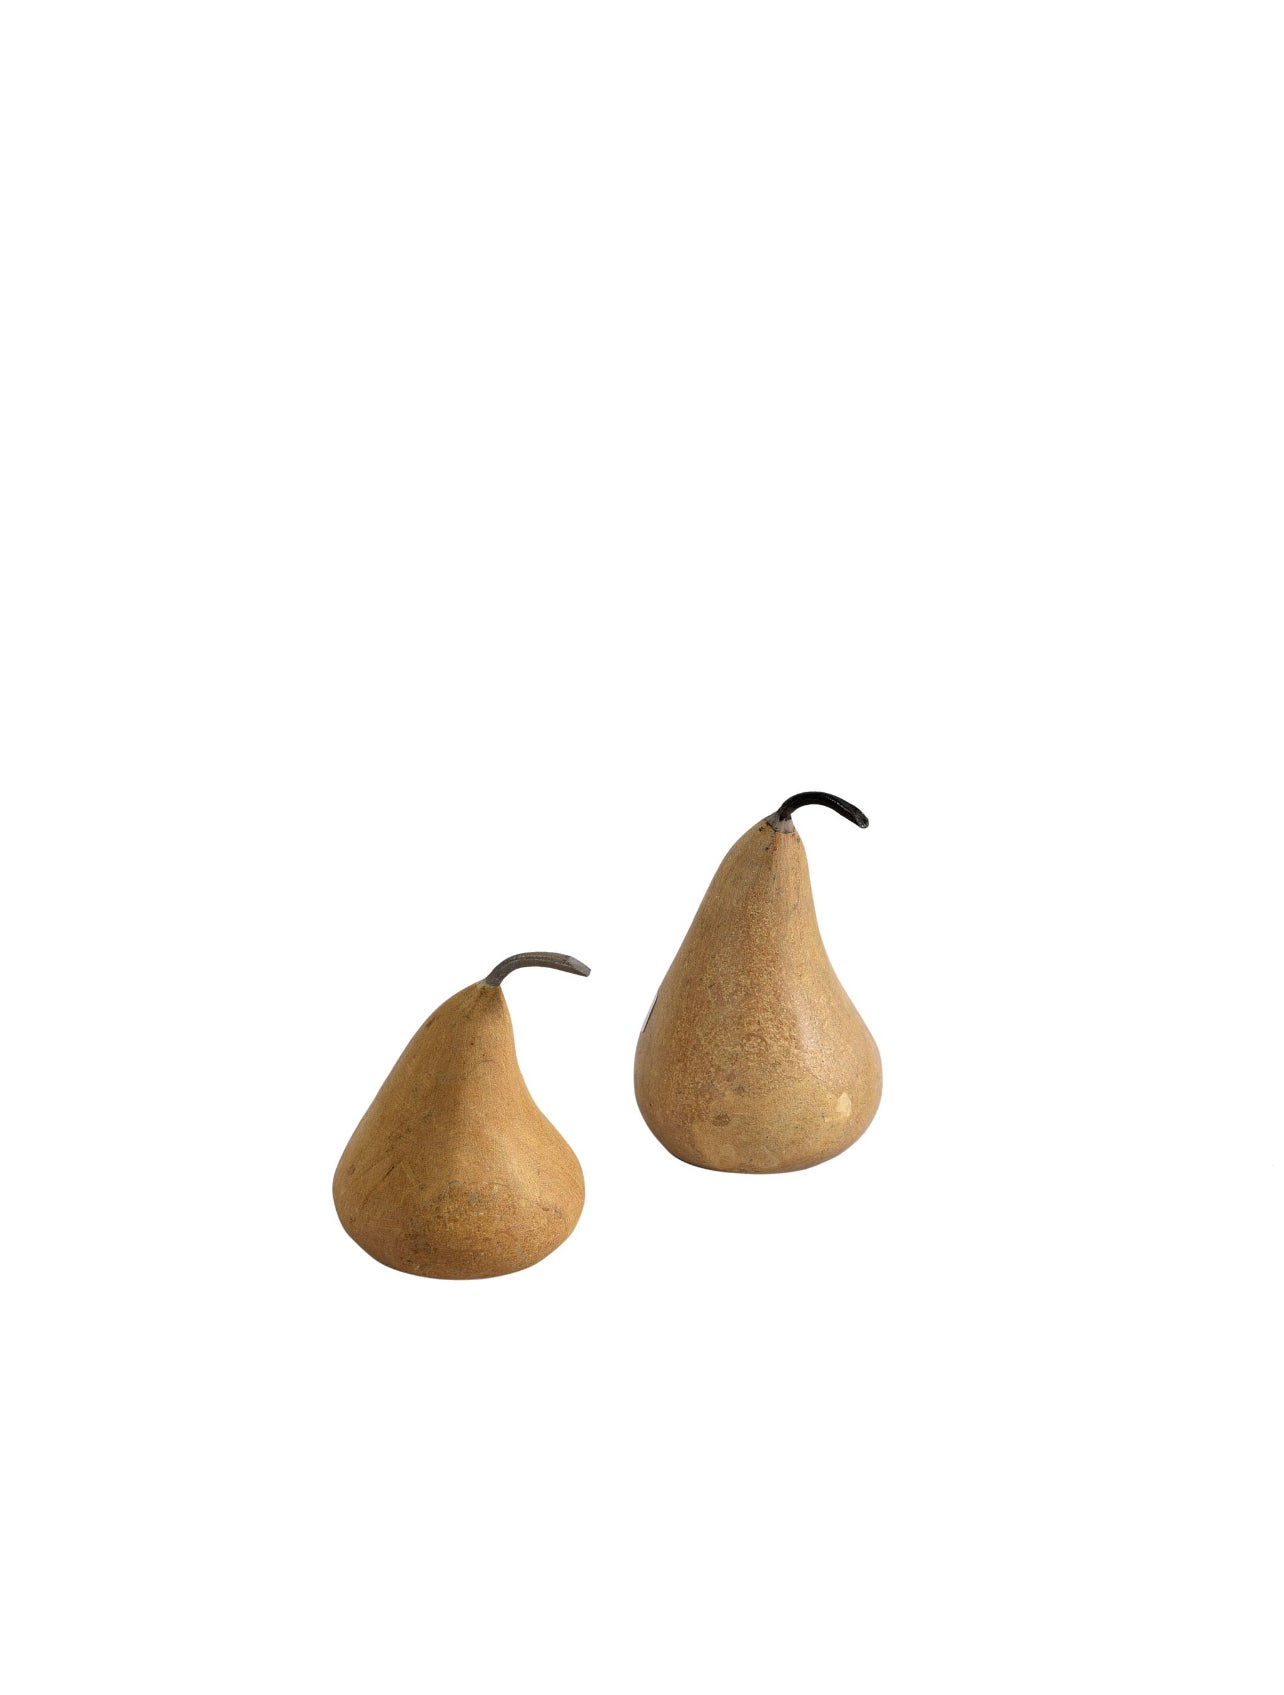 STONE PEARS | TWO SIZES